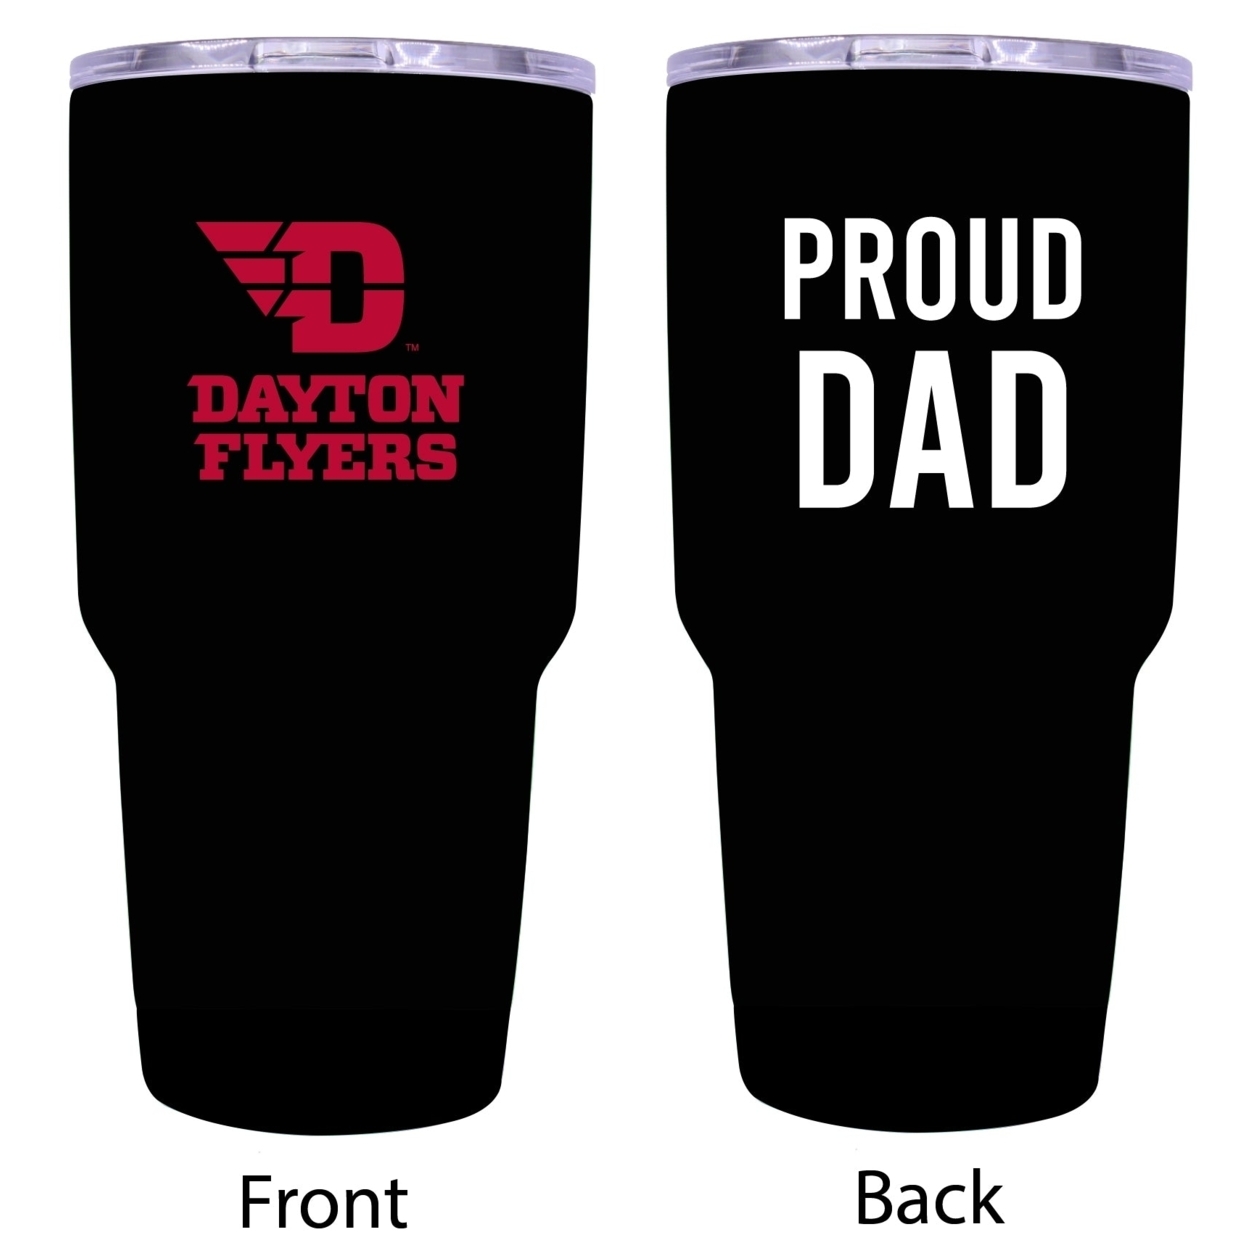 R And R Imports Dayton Flyers Proud Dad 24 Oz Insulated Stainless Steel Tumblers Black.